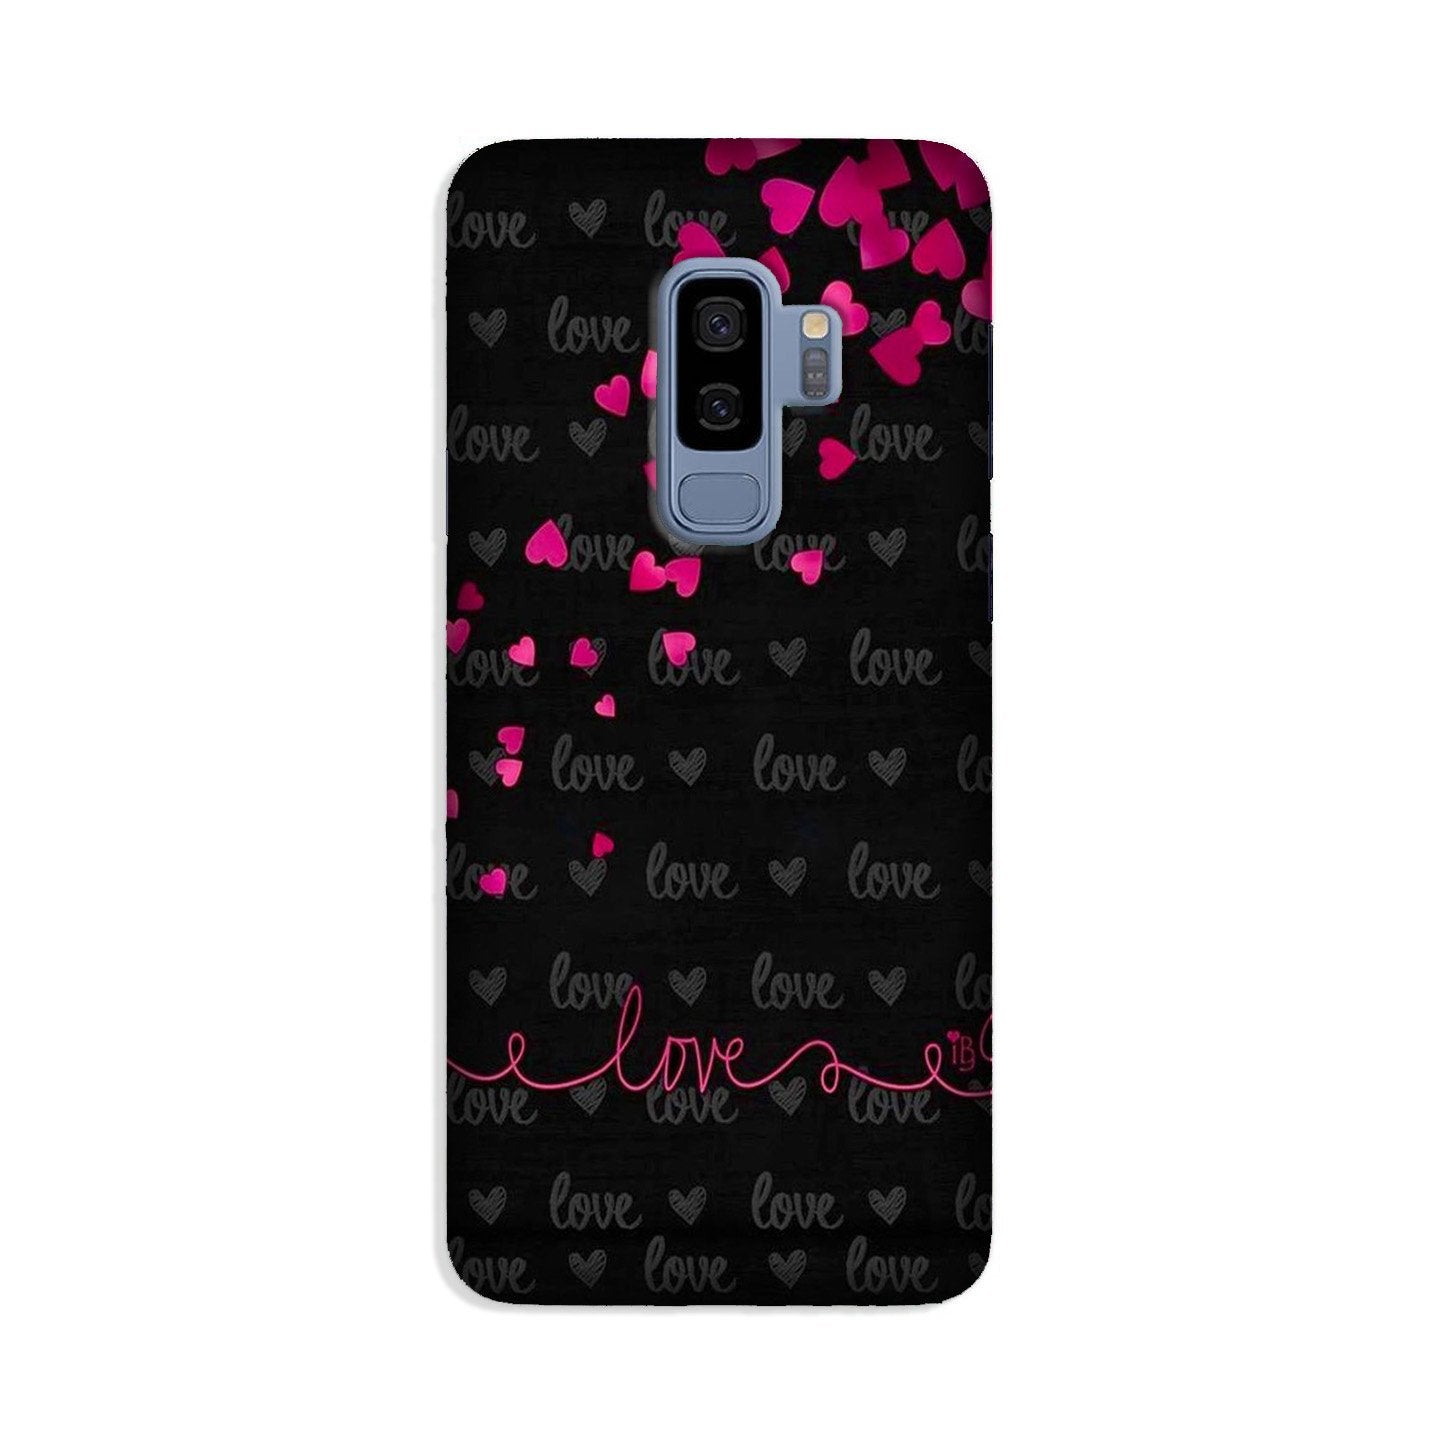 Love in Air Case for Galaxy S9 Plus